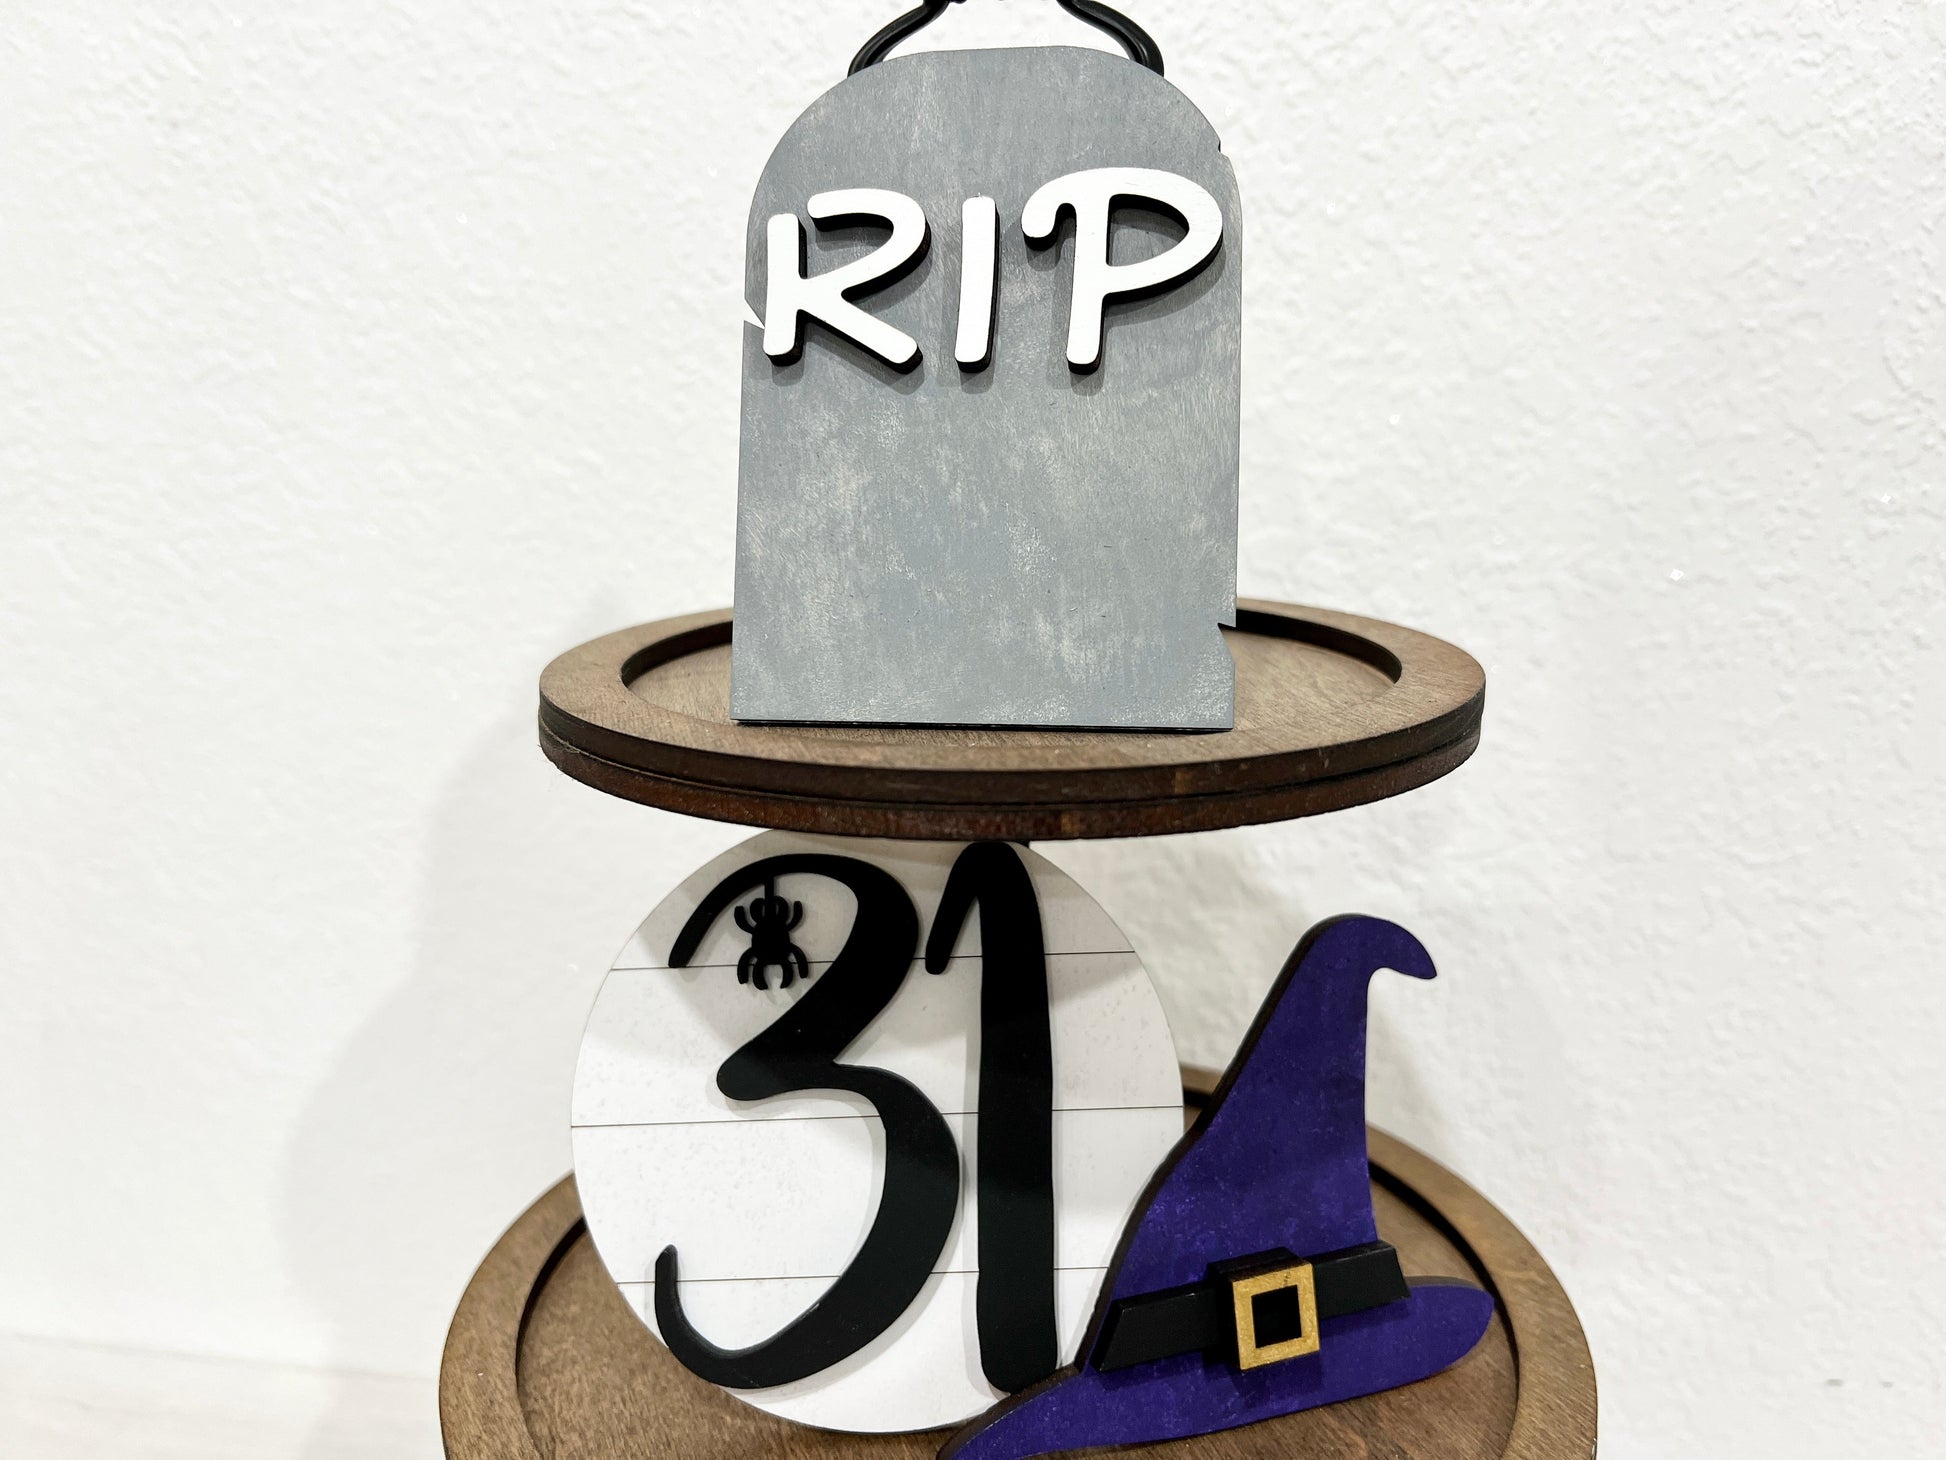 31 spider and witch's hat halloween tiered tray- Celebrating Together